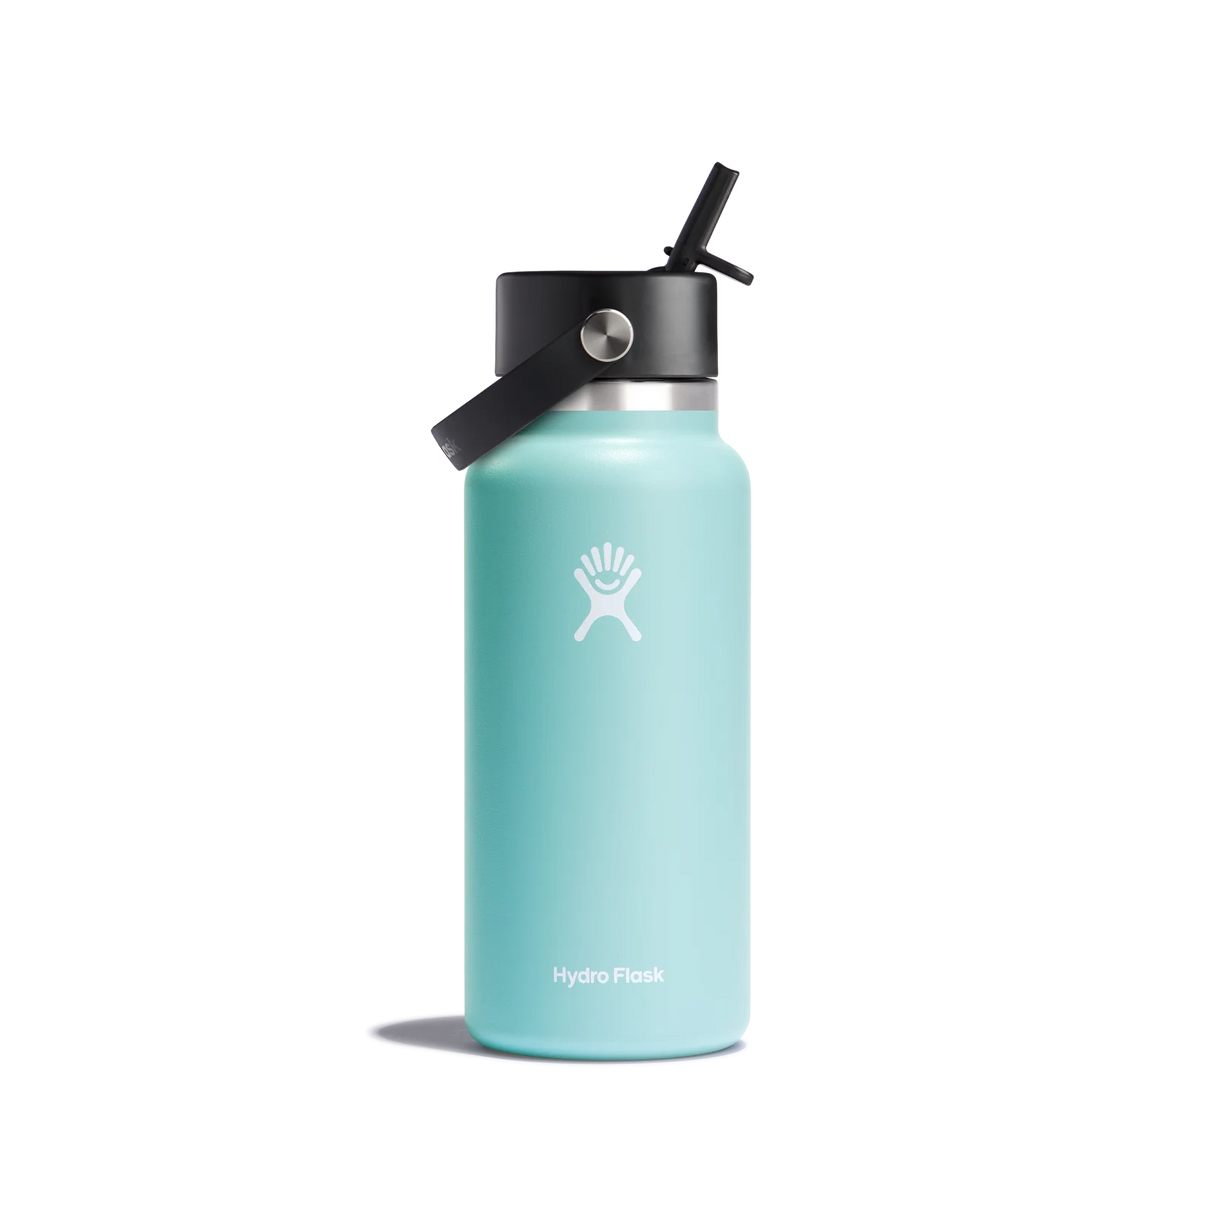 Hydro Flask 32oz (946ml) Wide Mouth Bottle with Flex Straw Cap